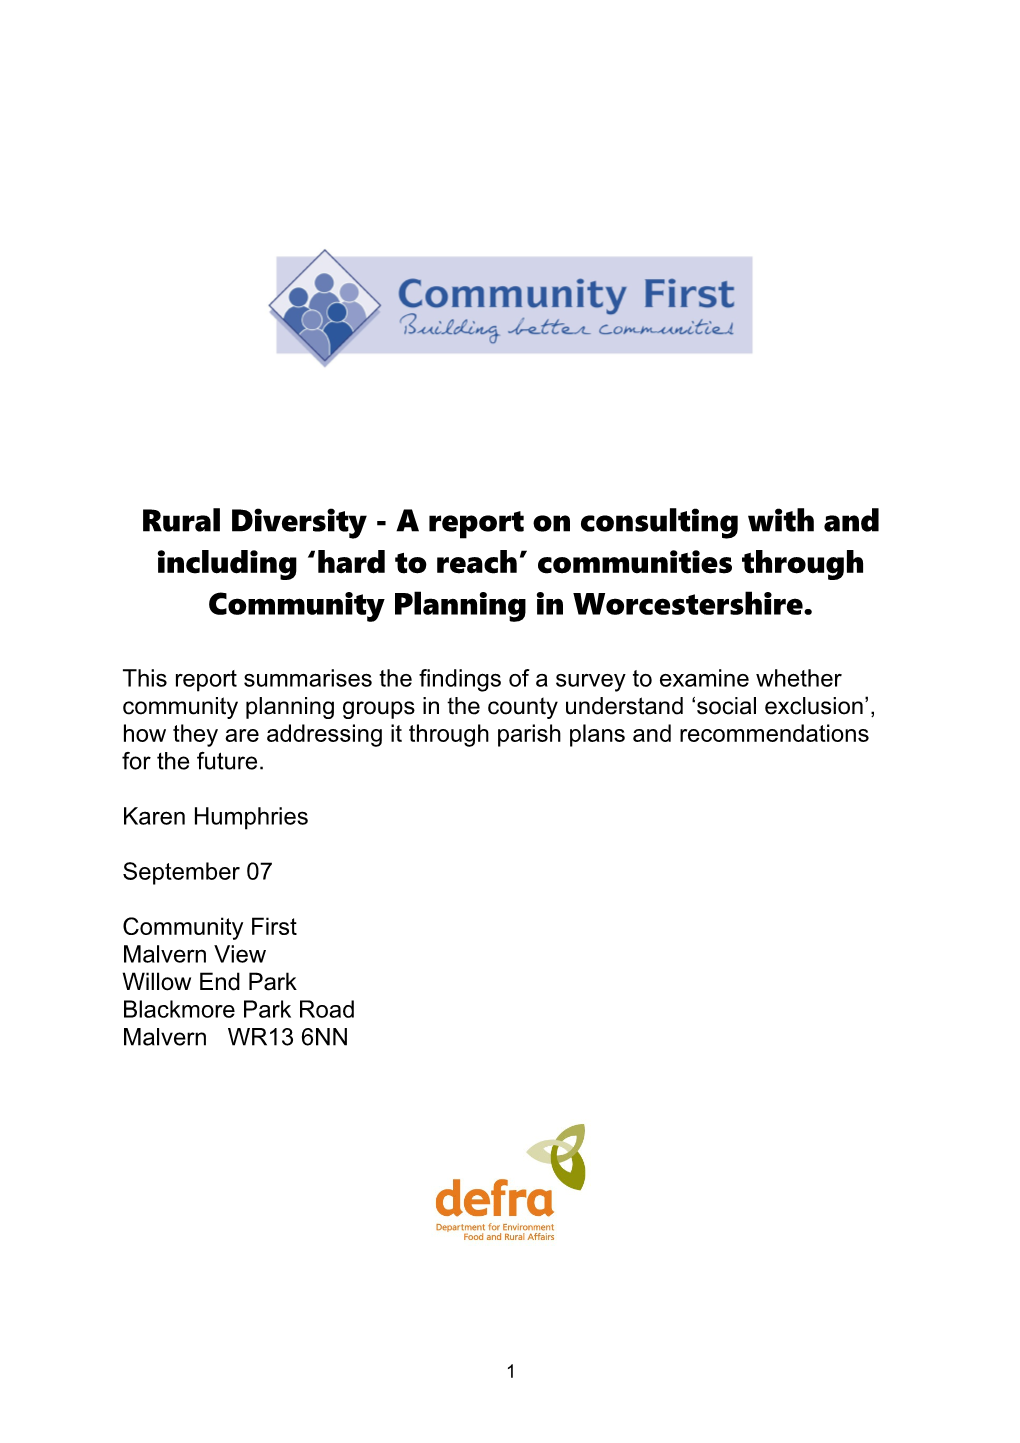 Consulting with Hard to Reach Communities Through Community Planning